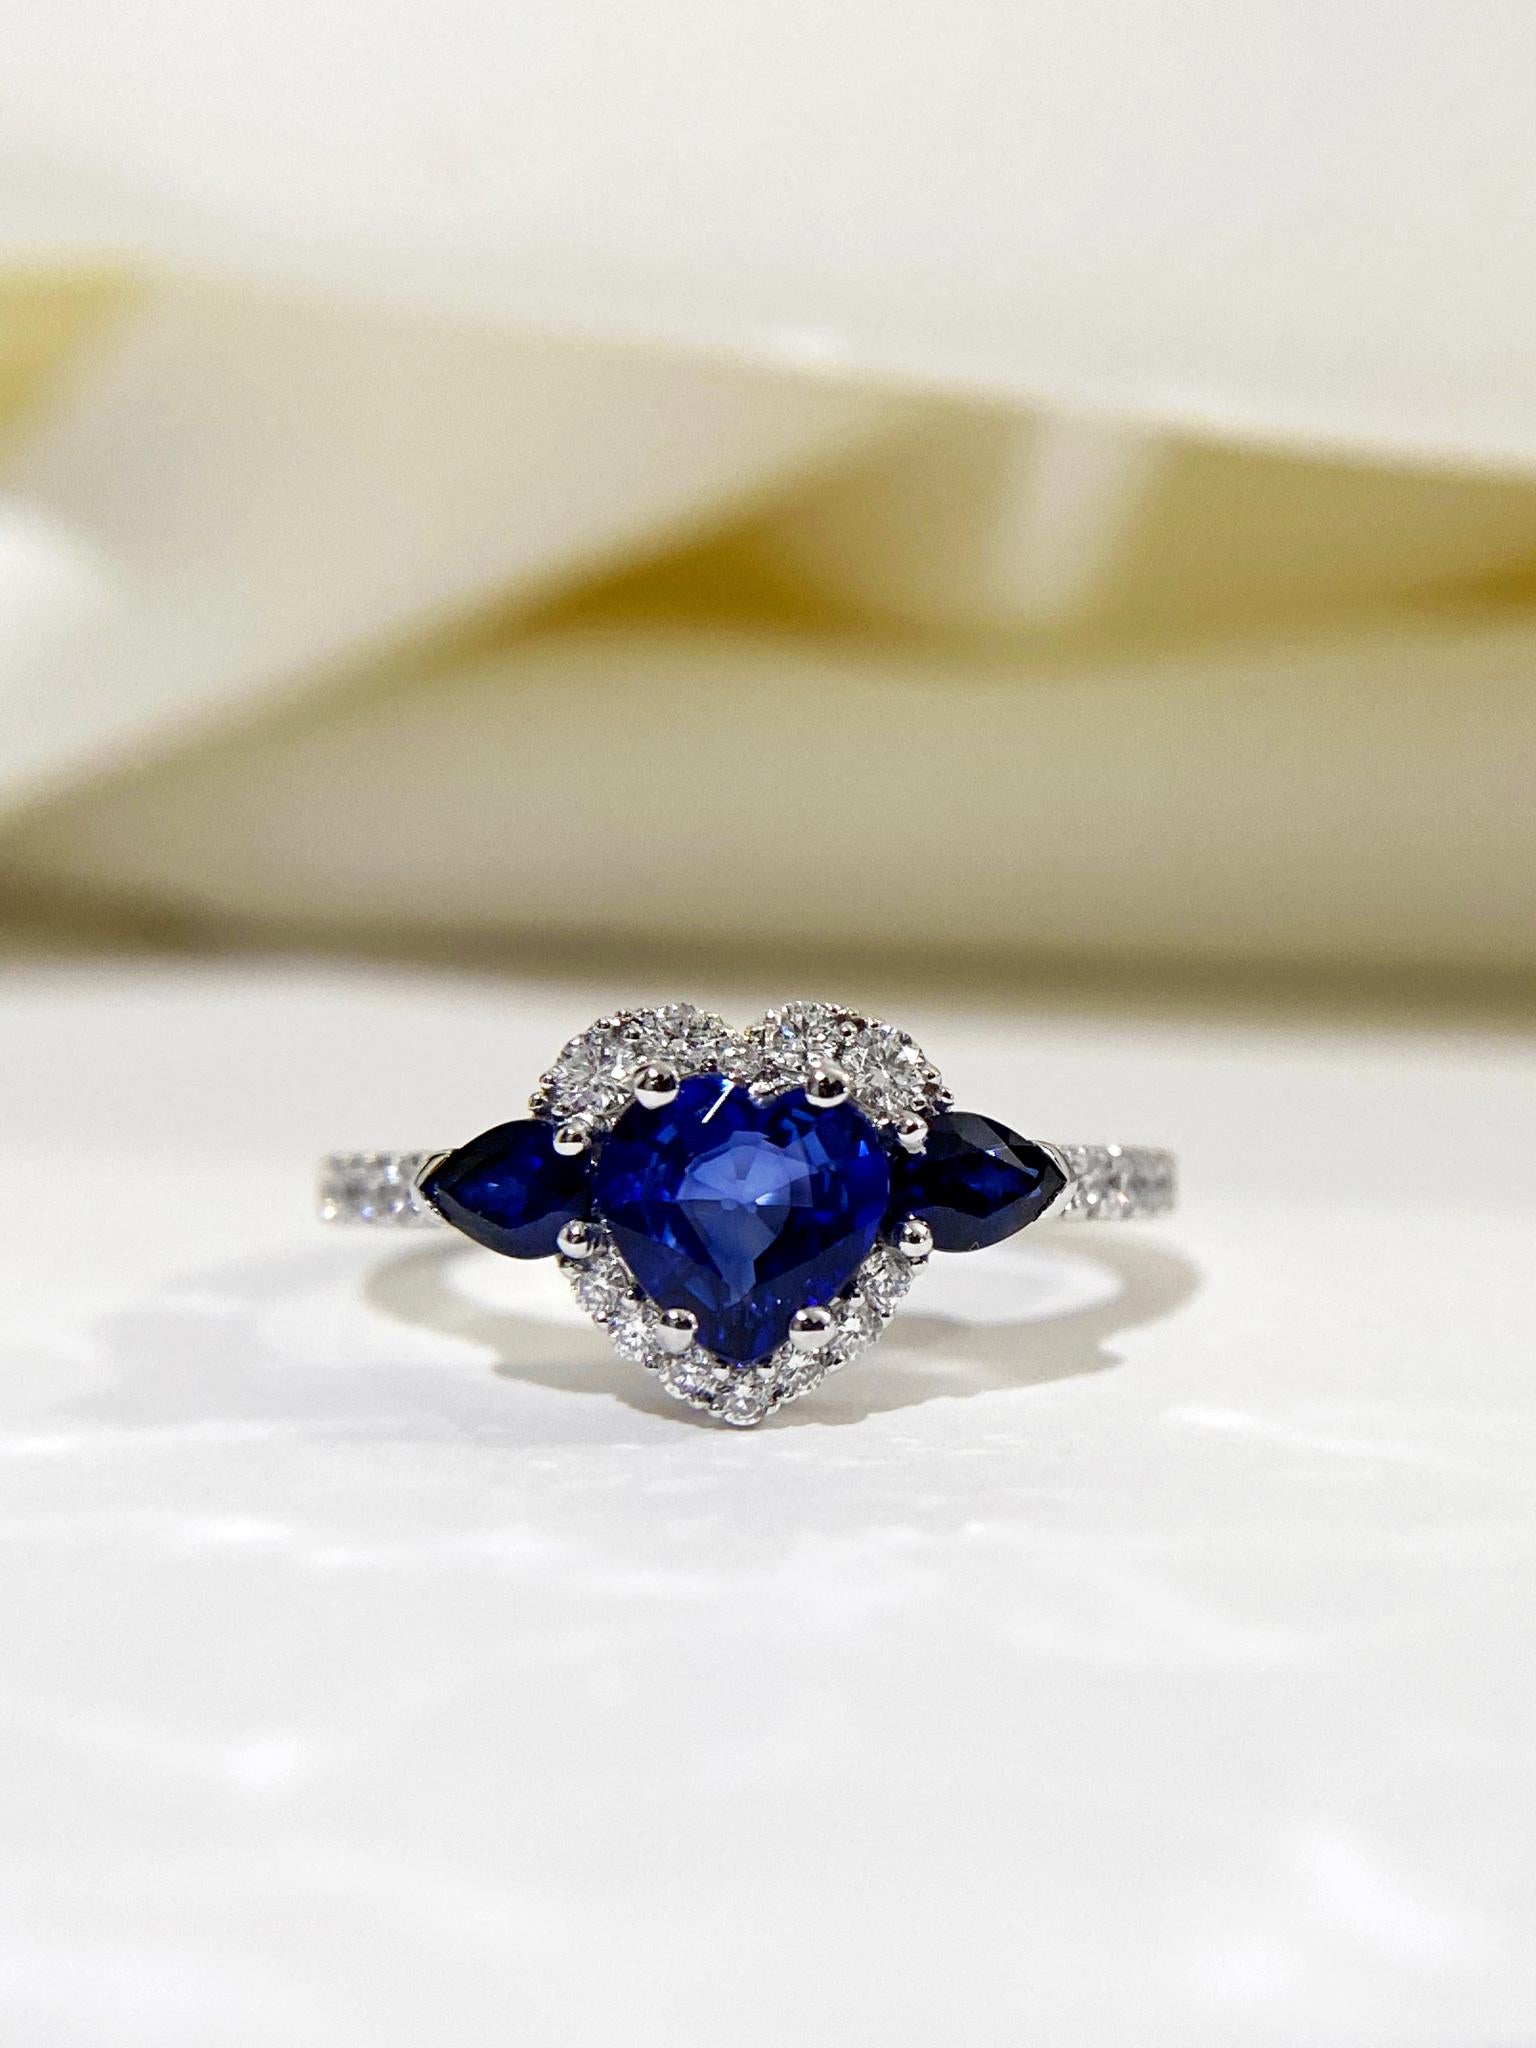 For Sale:  Heart Ring with Blue Sapphires and Diamonds, 18 Karat White Gold, Made in Italy 4